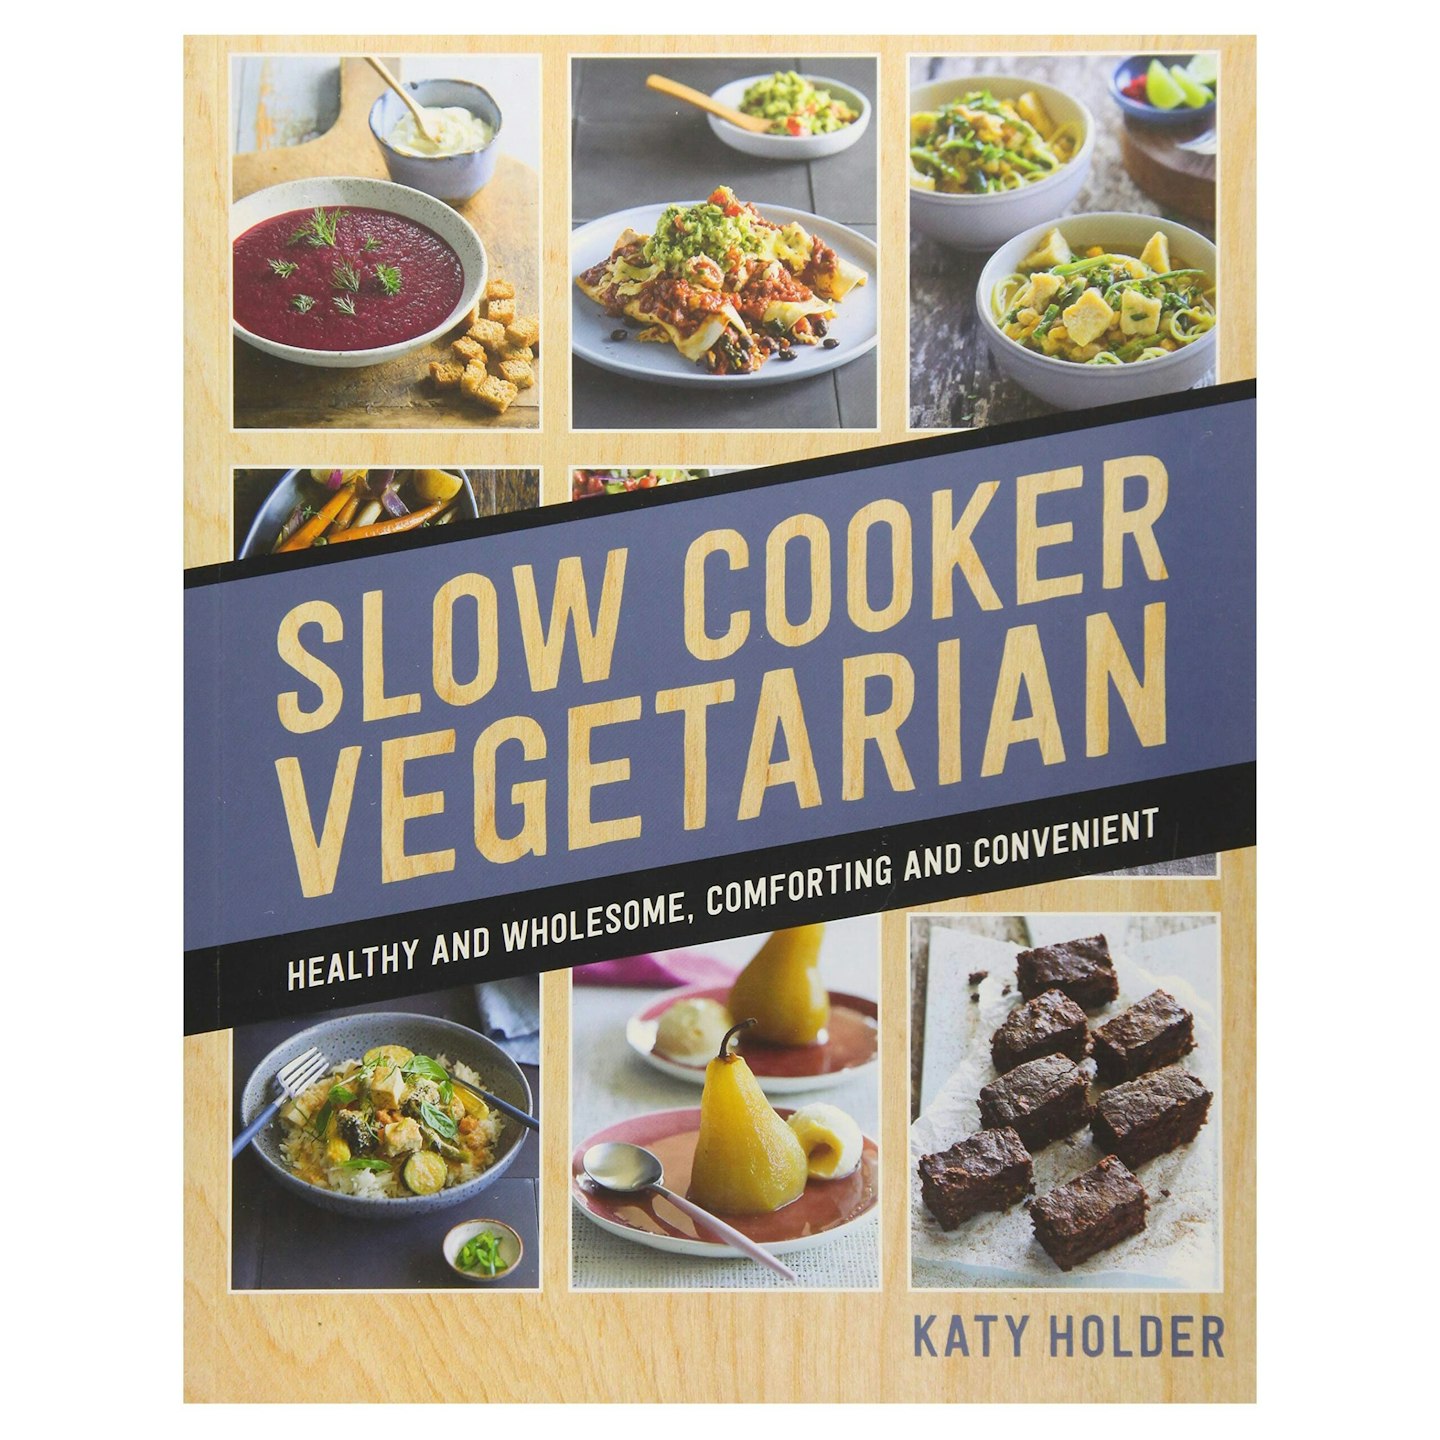 Slow Cooker Vegetarian: Healthy and wholesome, comforting and convenient